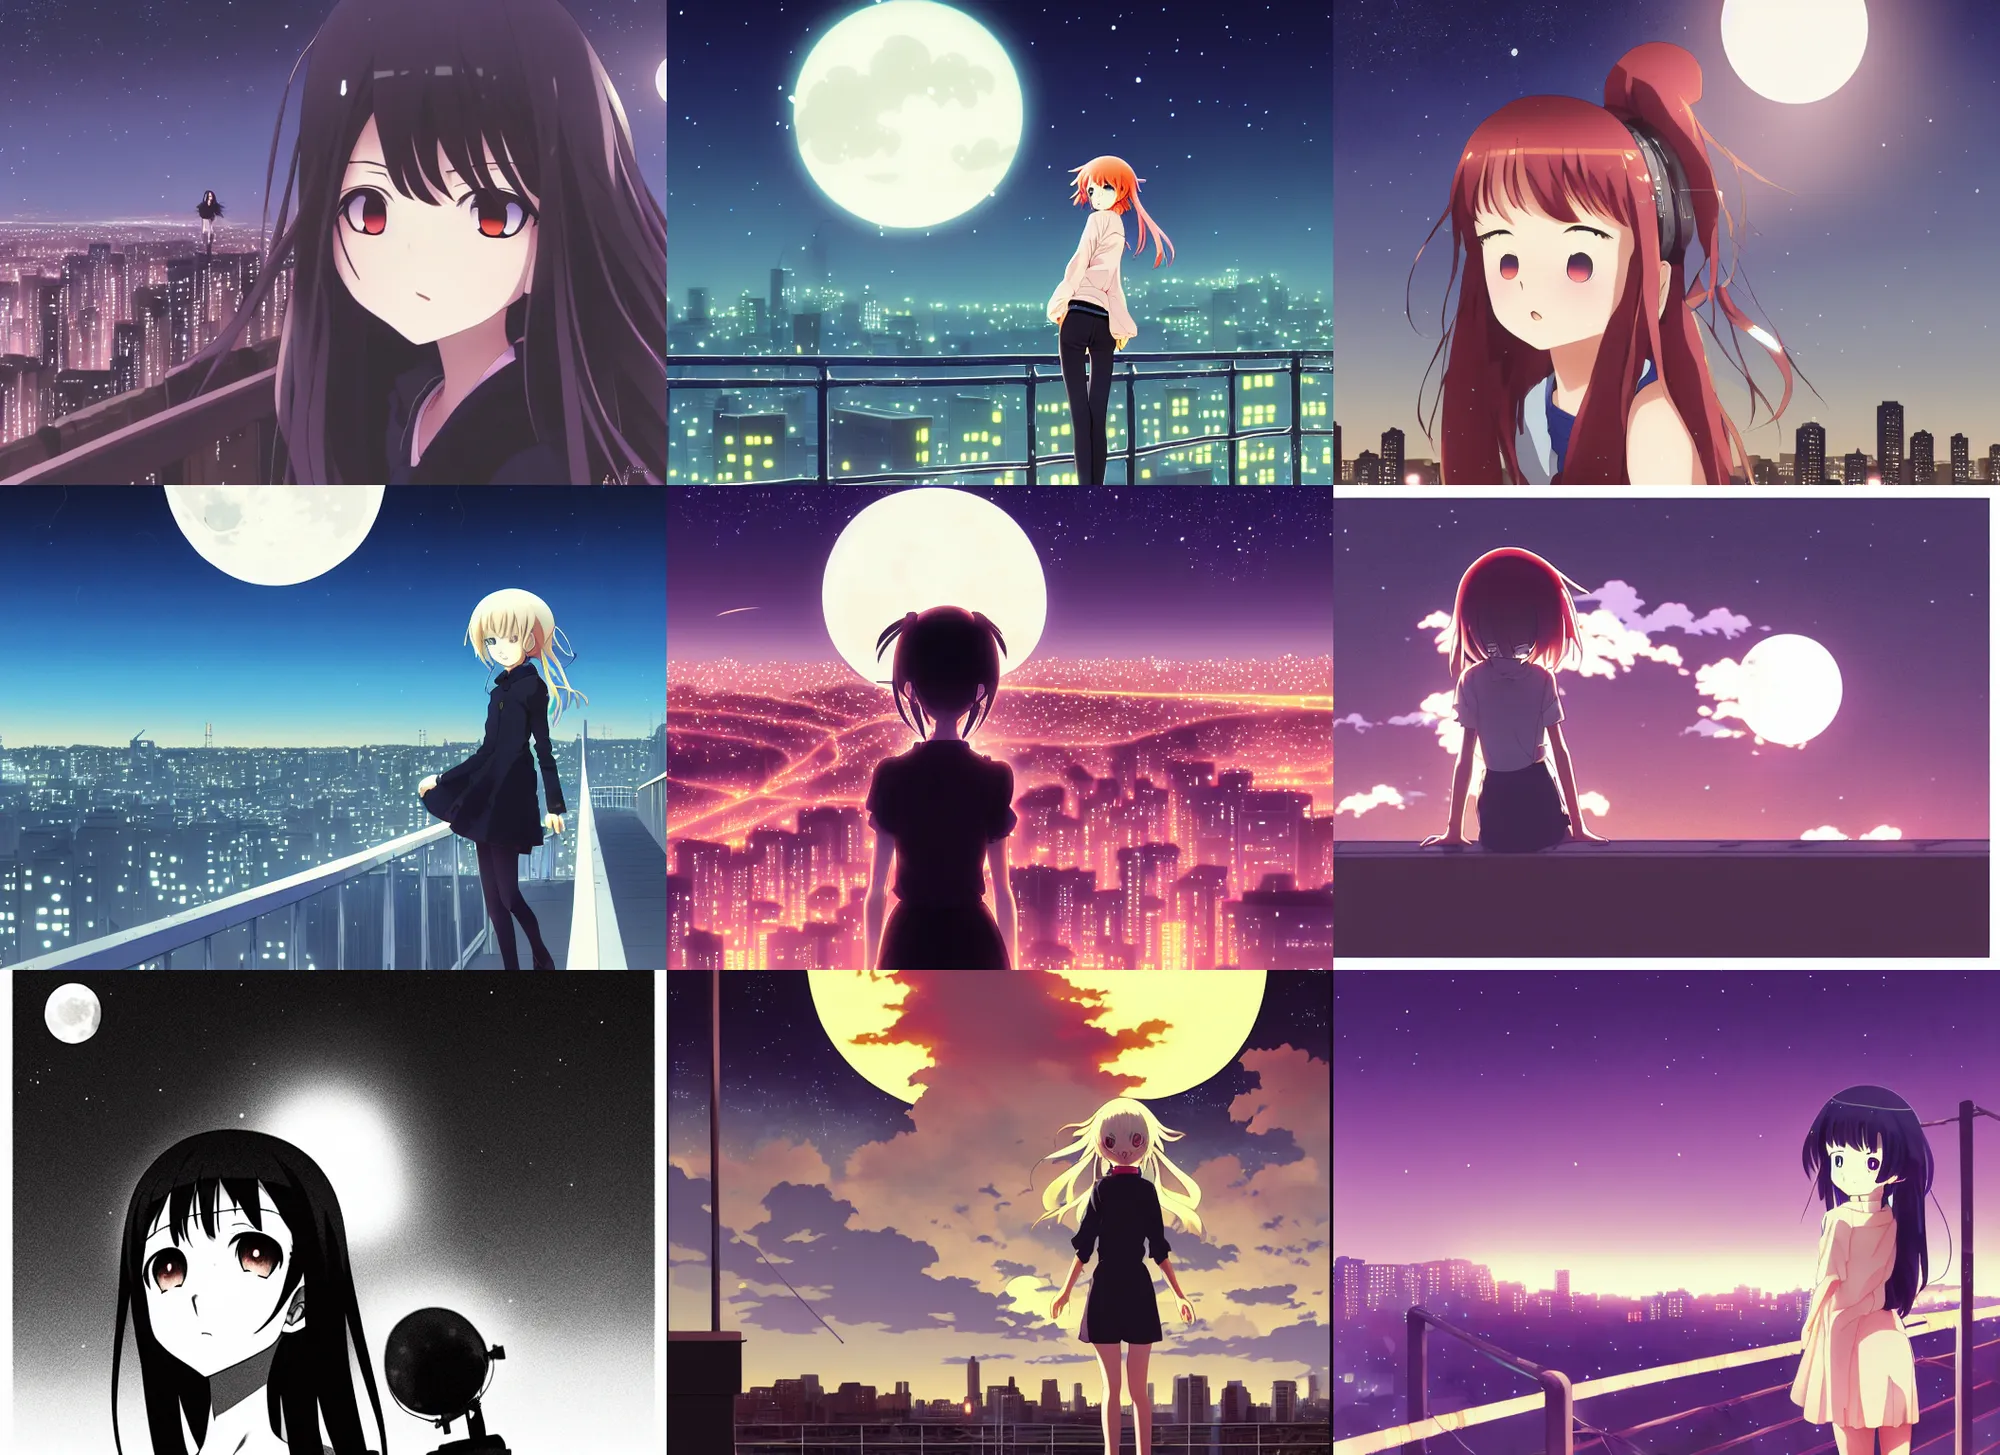 Prompt: anime visual, dark portrait of a young female sightseeing above the city at night, guardrail, moon, cute face by yoh yoshinari, katsura masakazu!, strong silhouette, ilya kuvshinov, anime cels, 1 8 mm lens, rounded eyes, moody, detailed facial features, inked